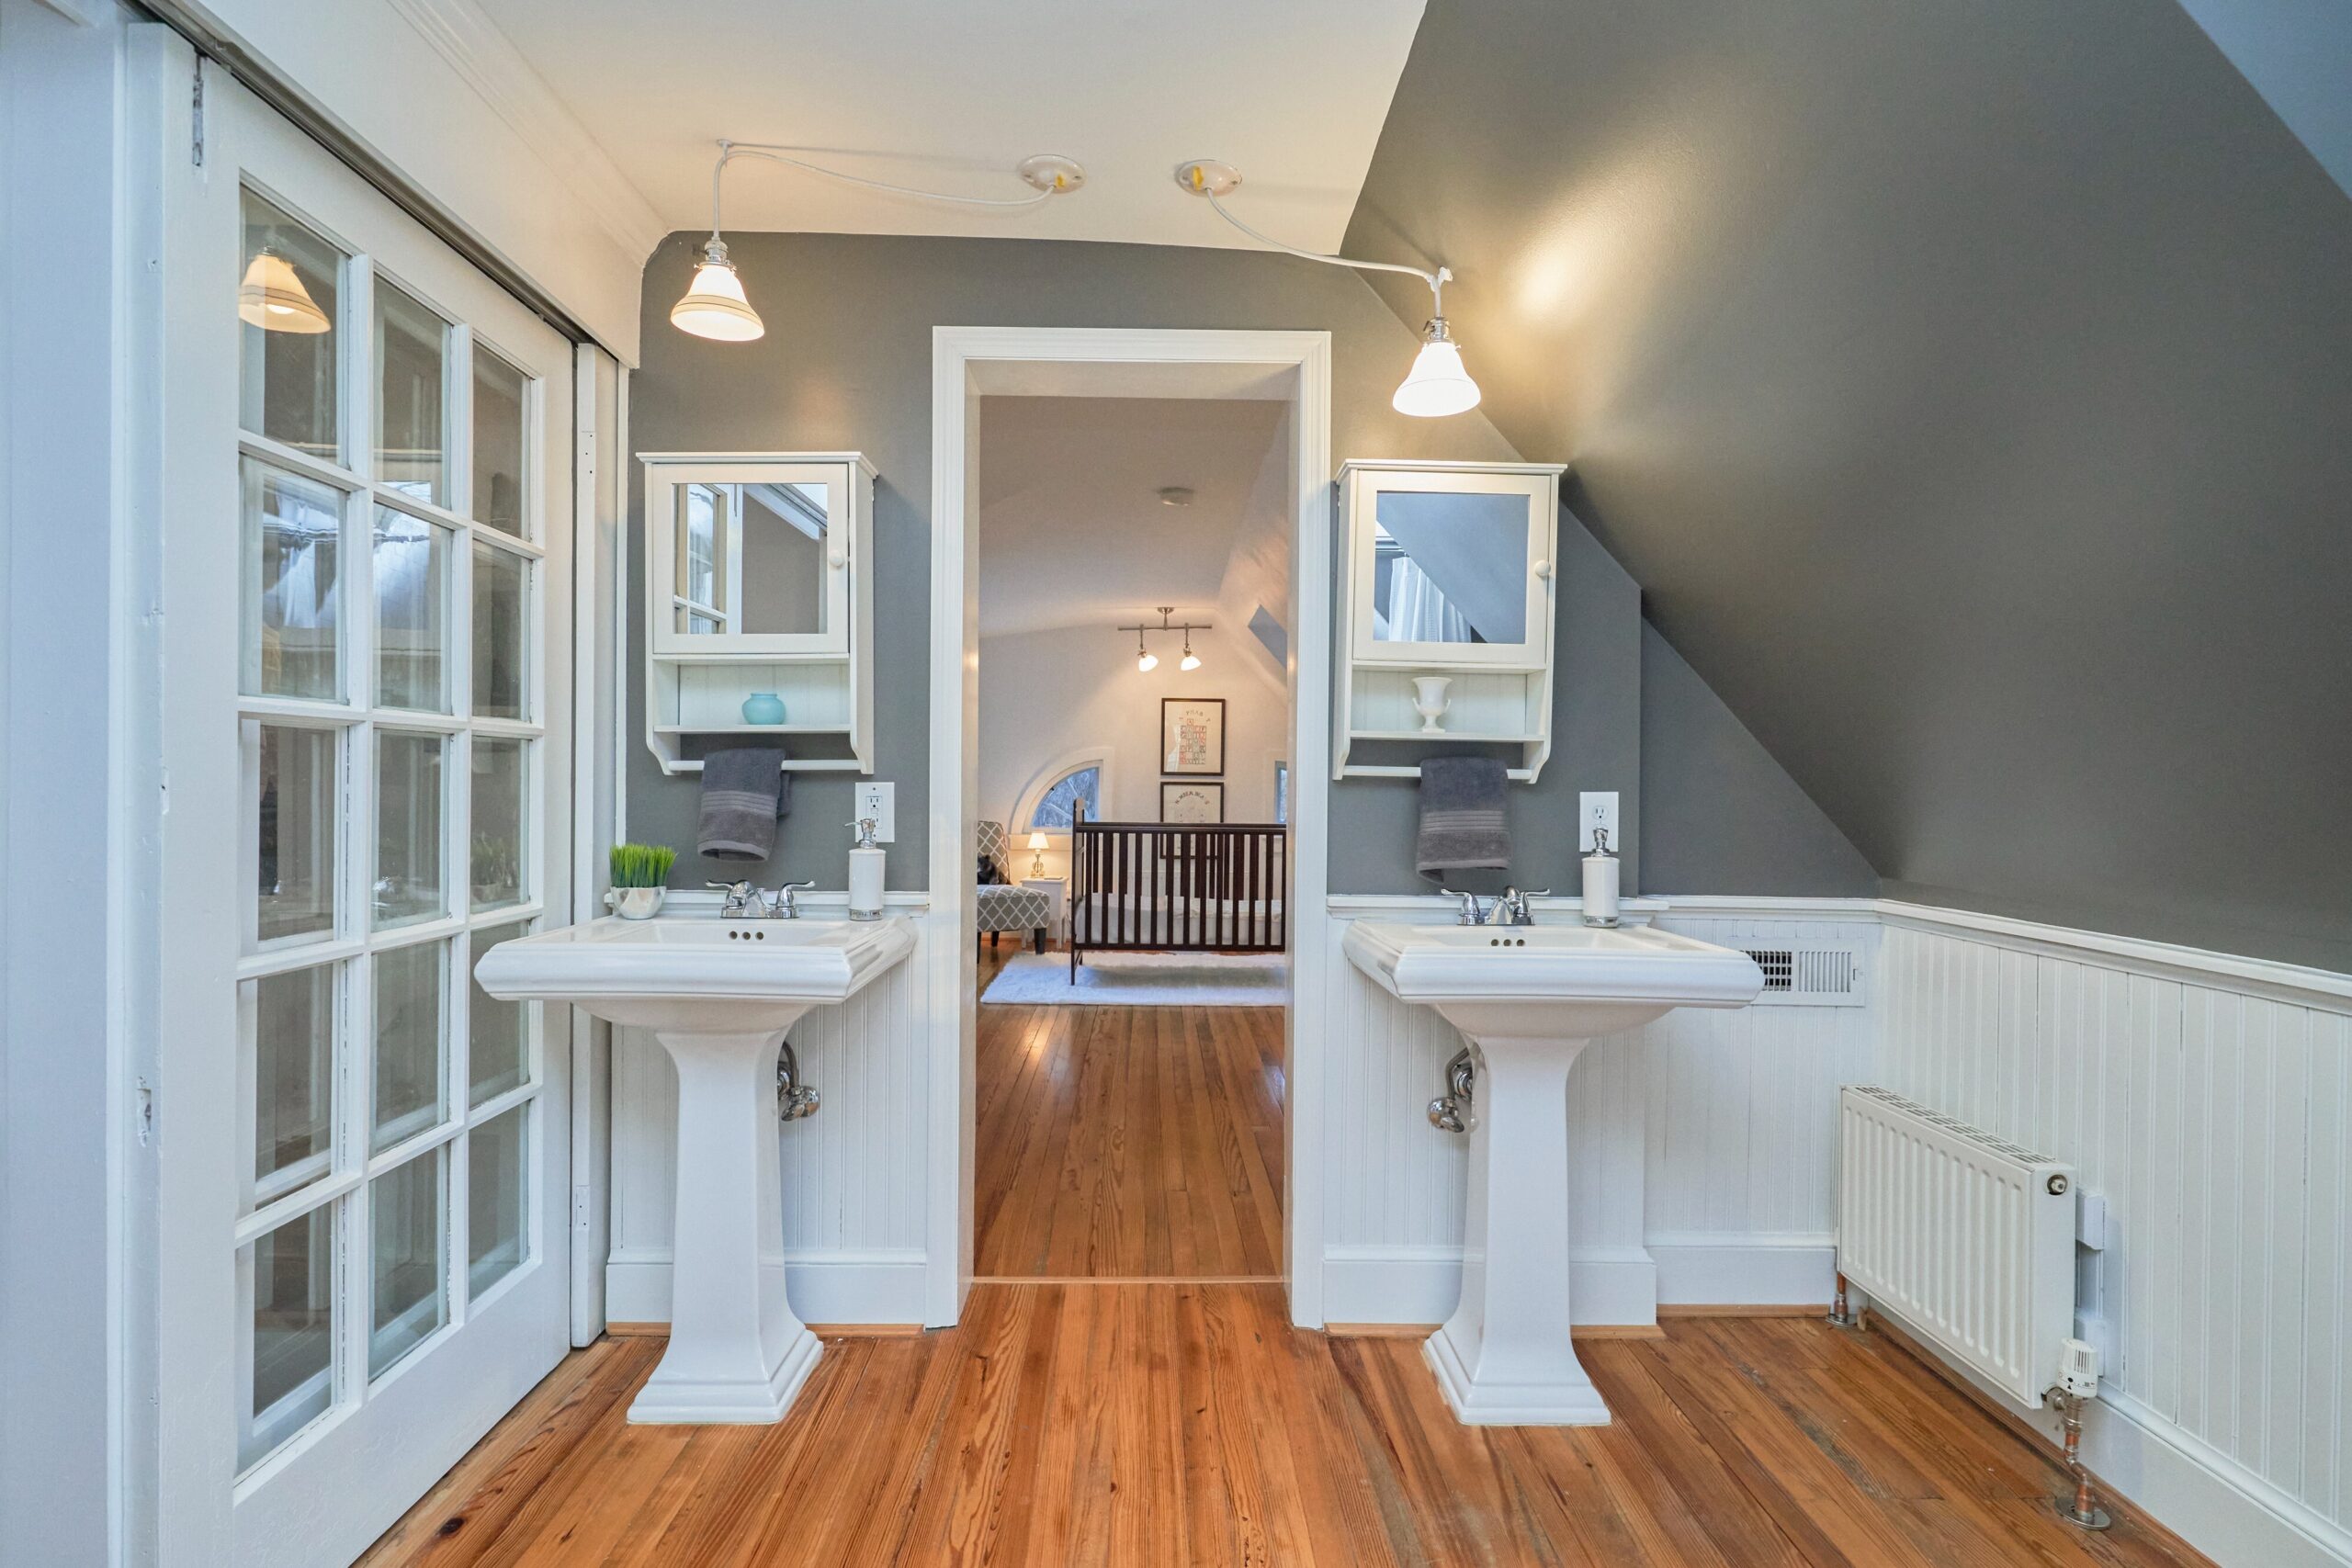 Professional interior photo of 5933 16th St N, Arlington, VA - showing the master bathroom with sinks on either side of a doorway which leads to a third bedroom